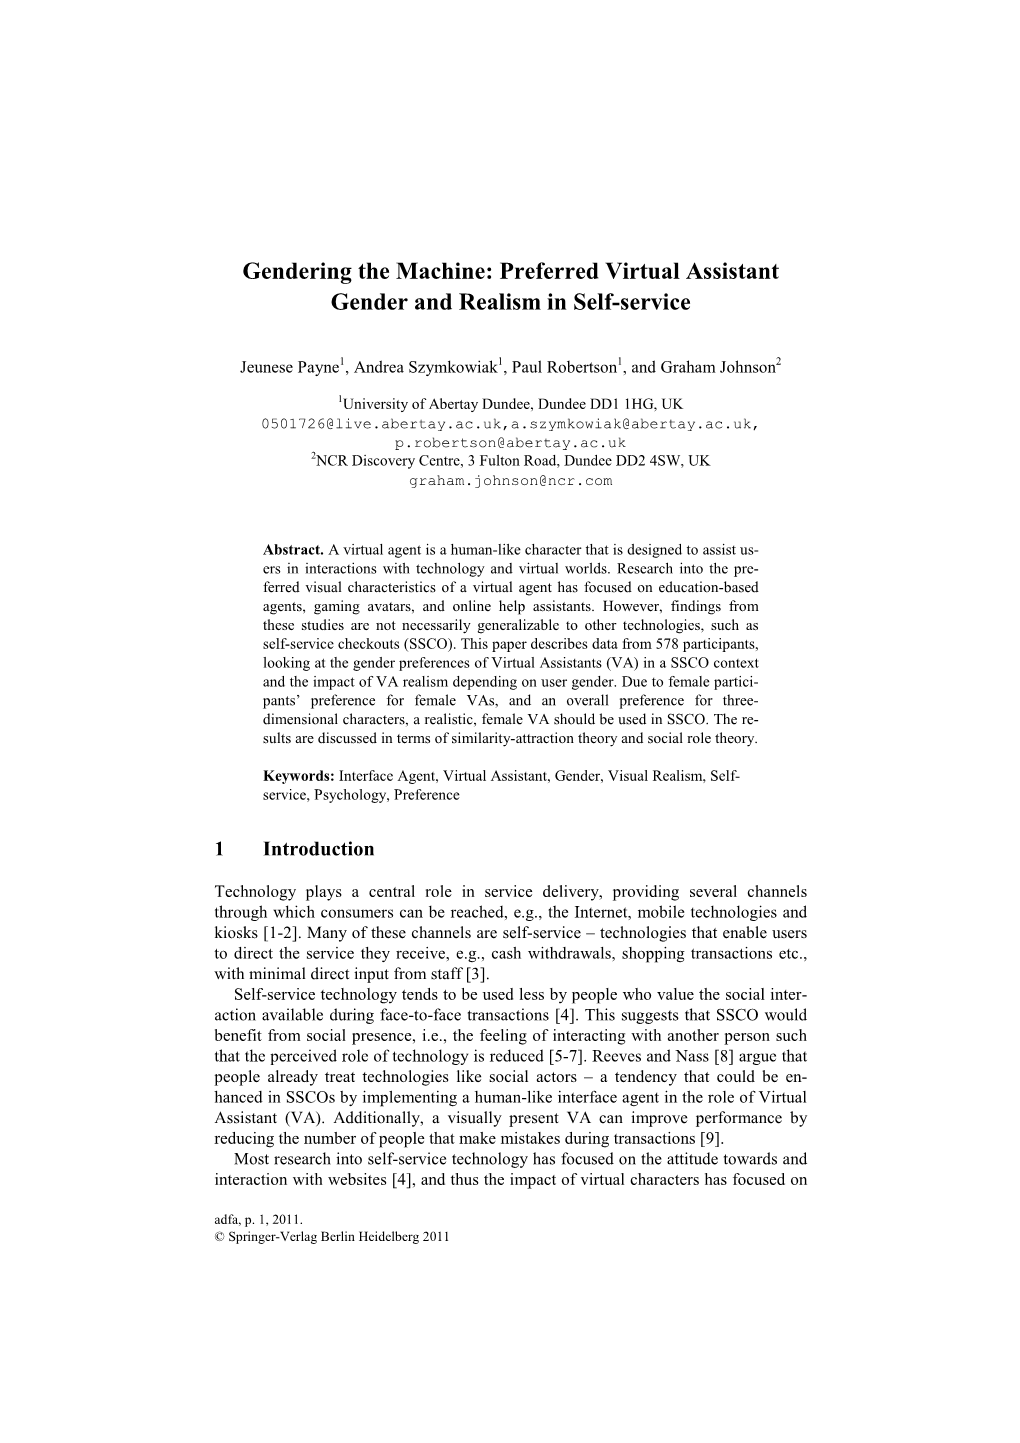 Preferred Virtual Assistant Gender and Realism in Self-Service